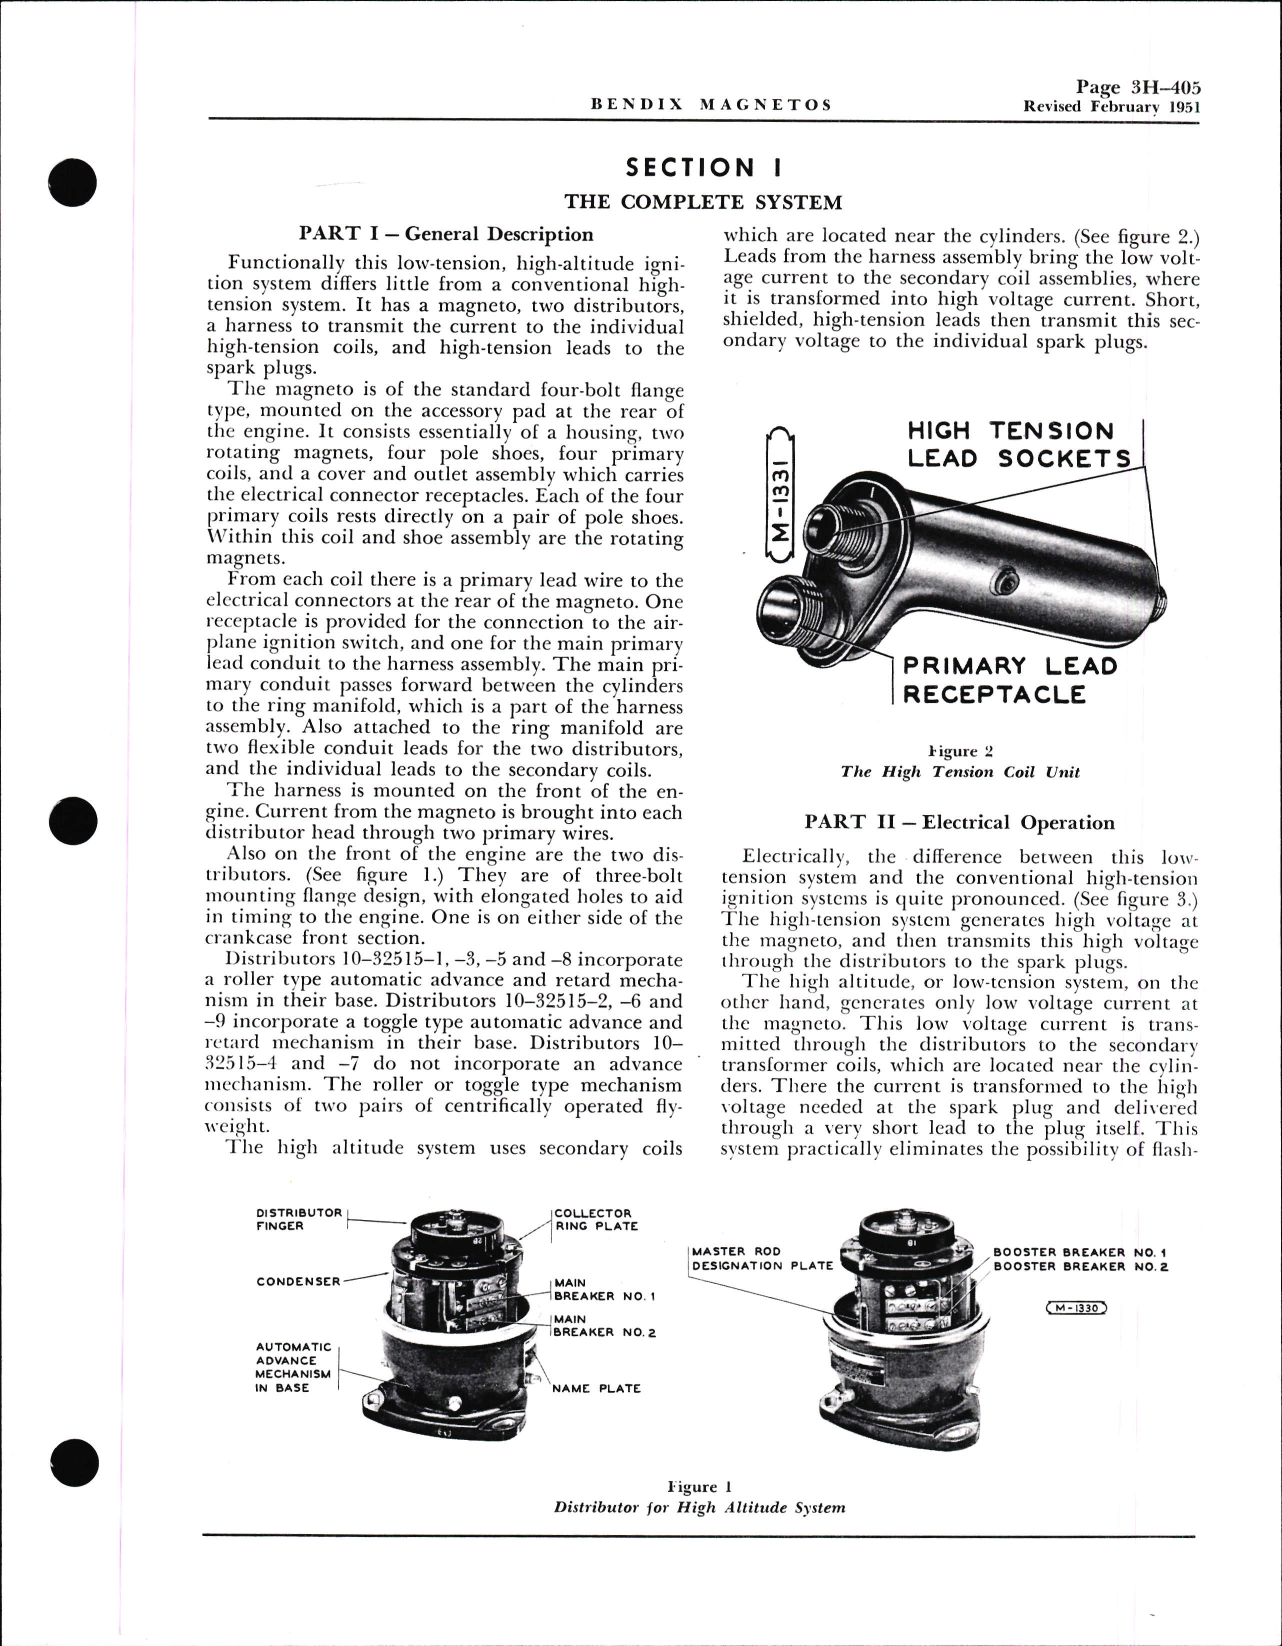 Sample page 5 from AirCorps Library document: Overhaul Instructions for Bendix Low Tension - High Altitude Ignition for Wright R-3350